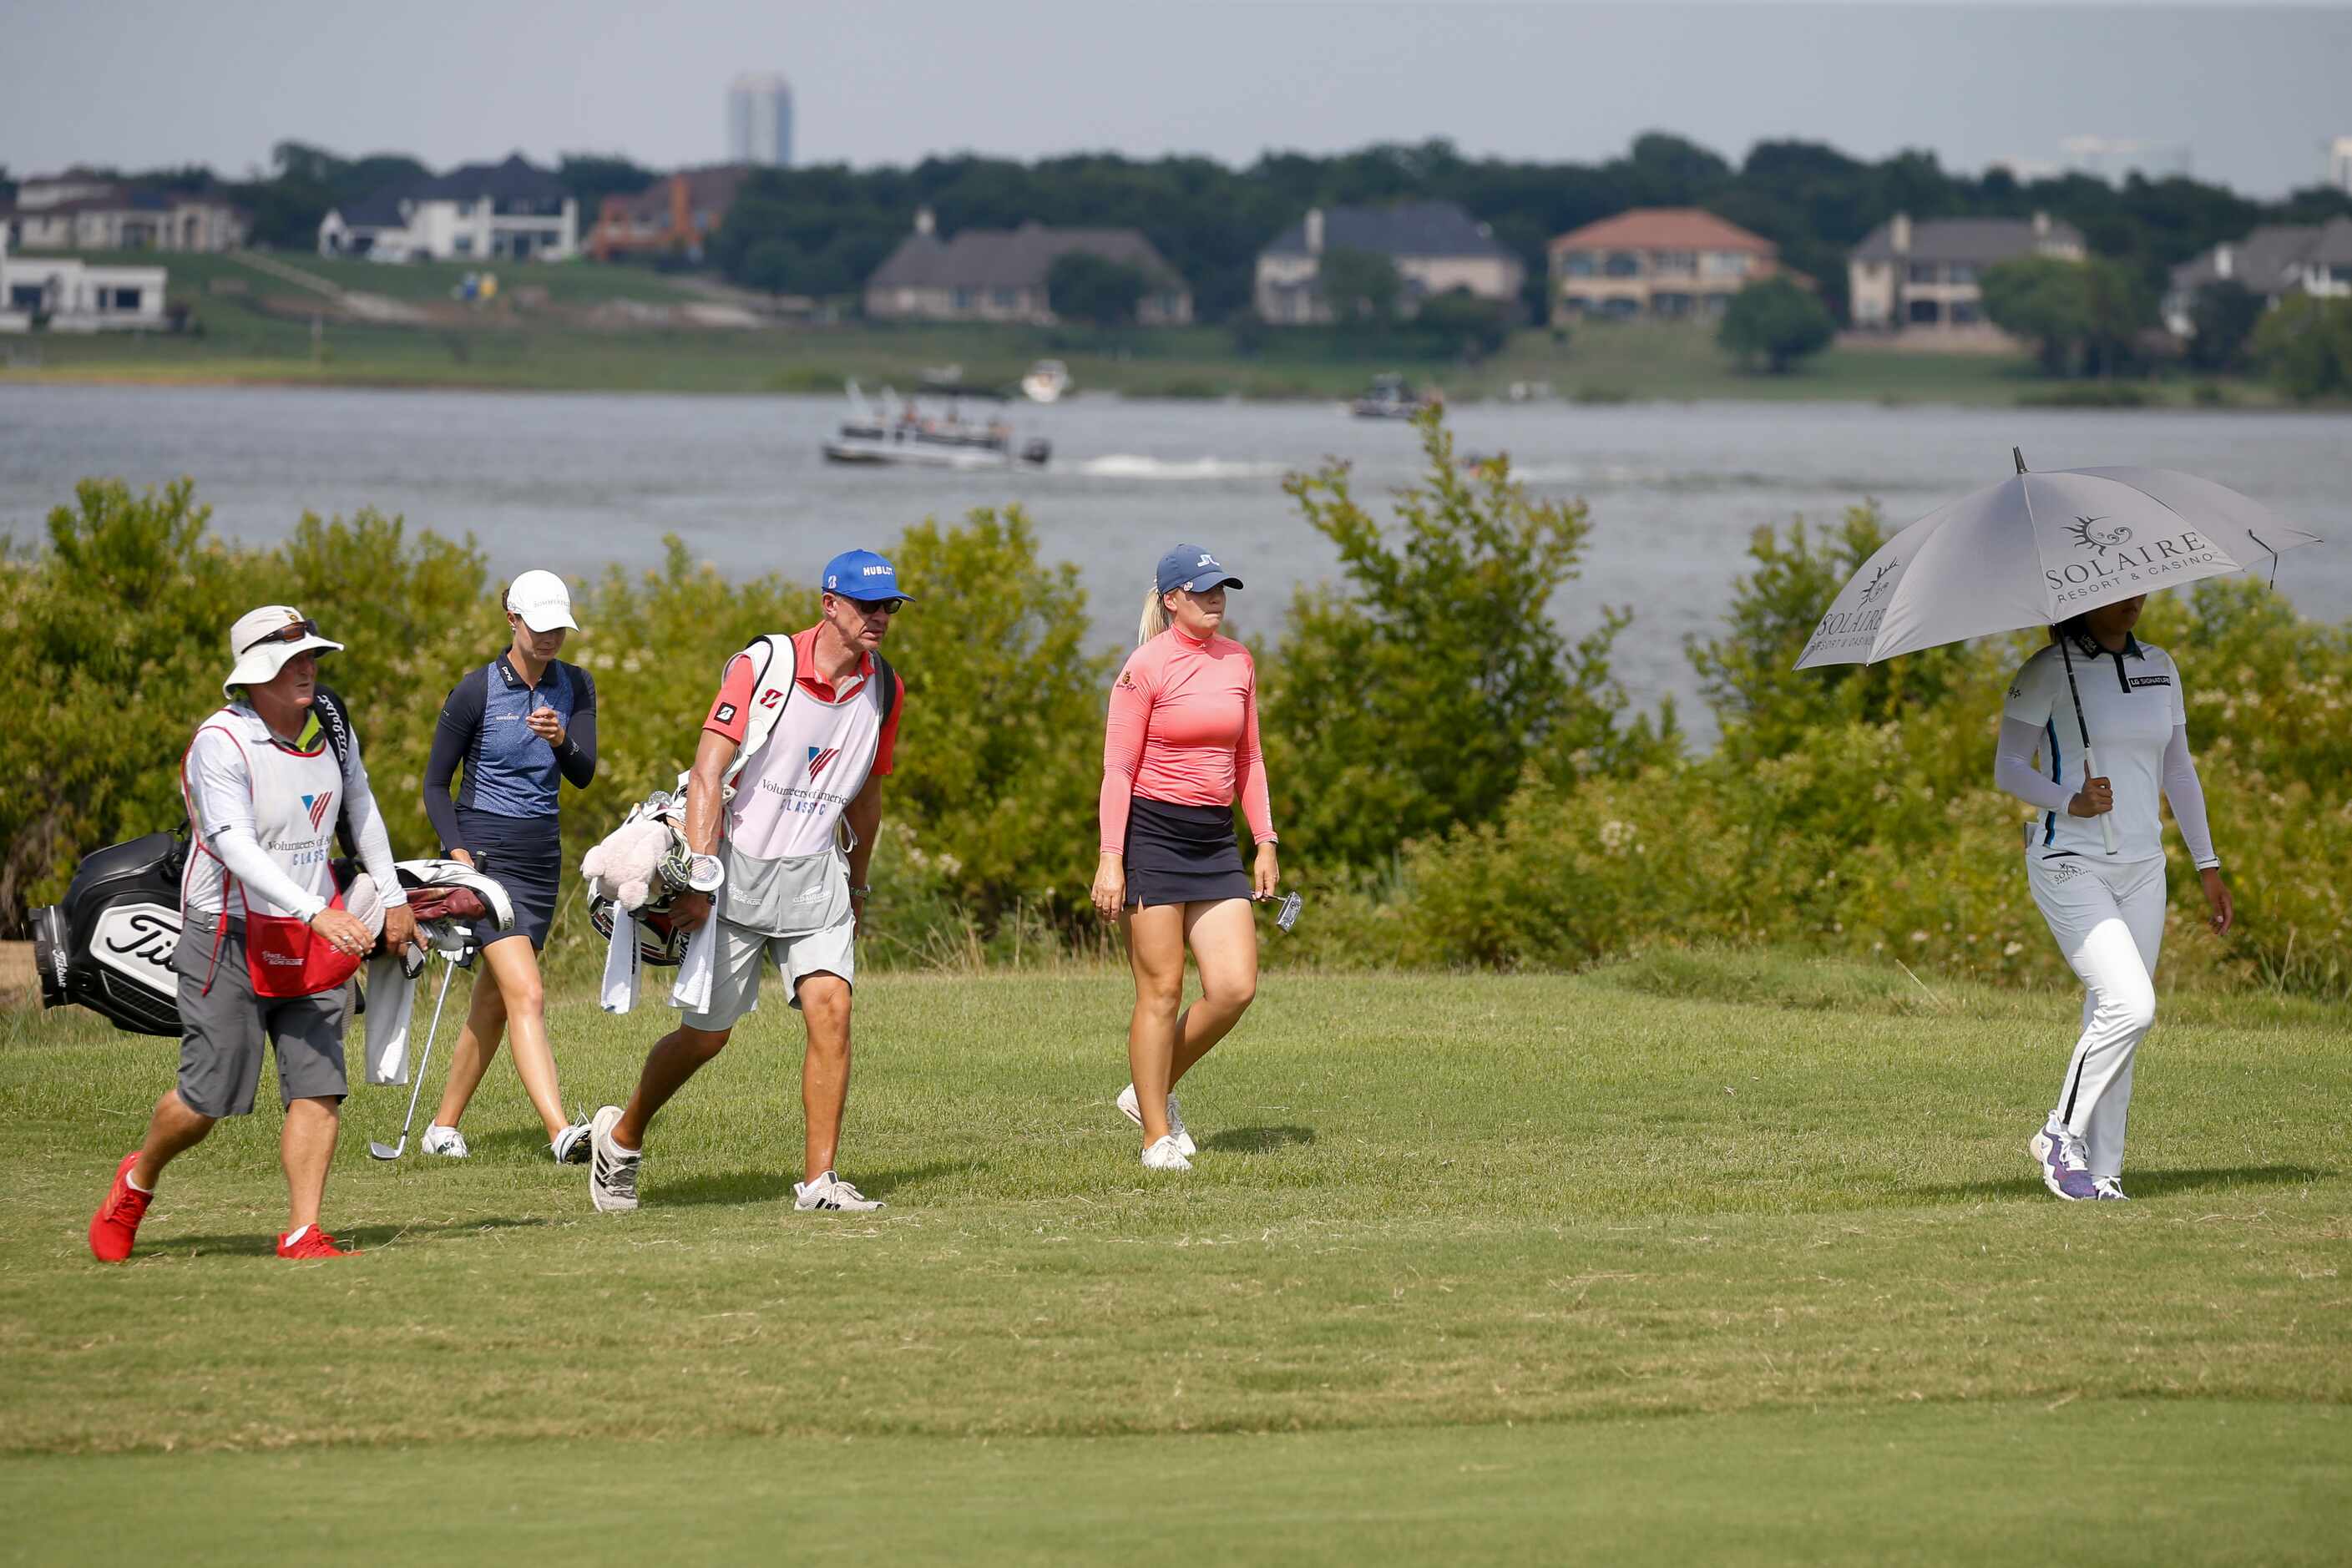 The final grouping makes their way down the No. 5 fairway during the final round of the LPGA...